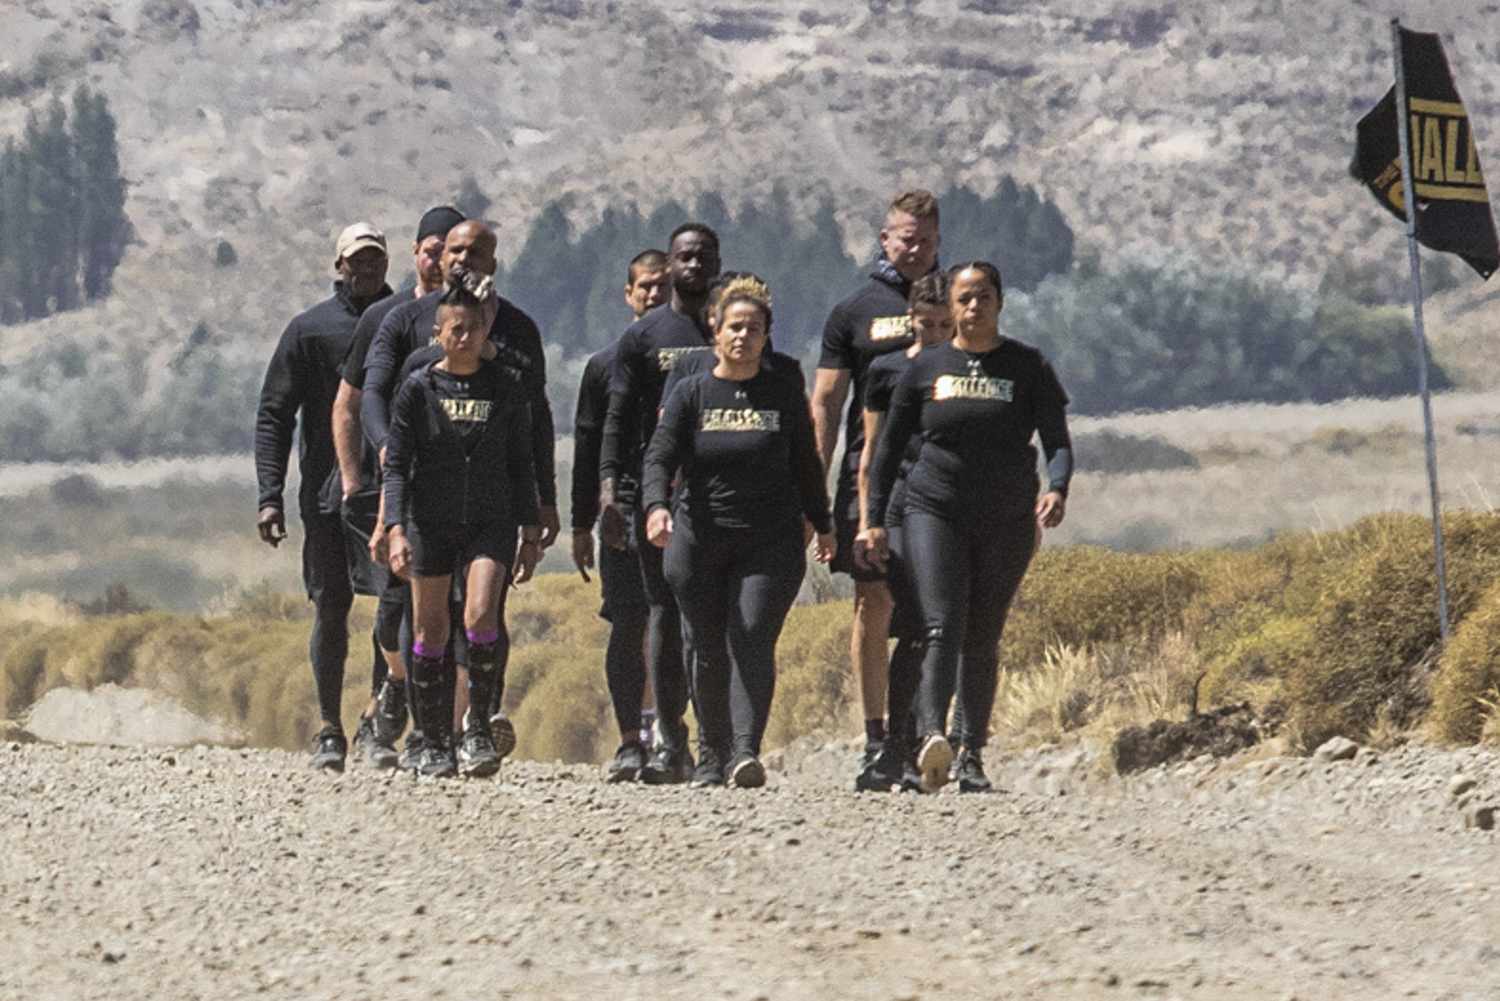 THE CHALLENGE: ALL STARS